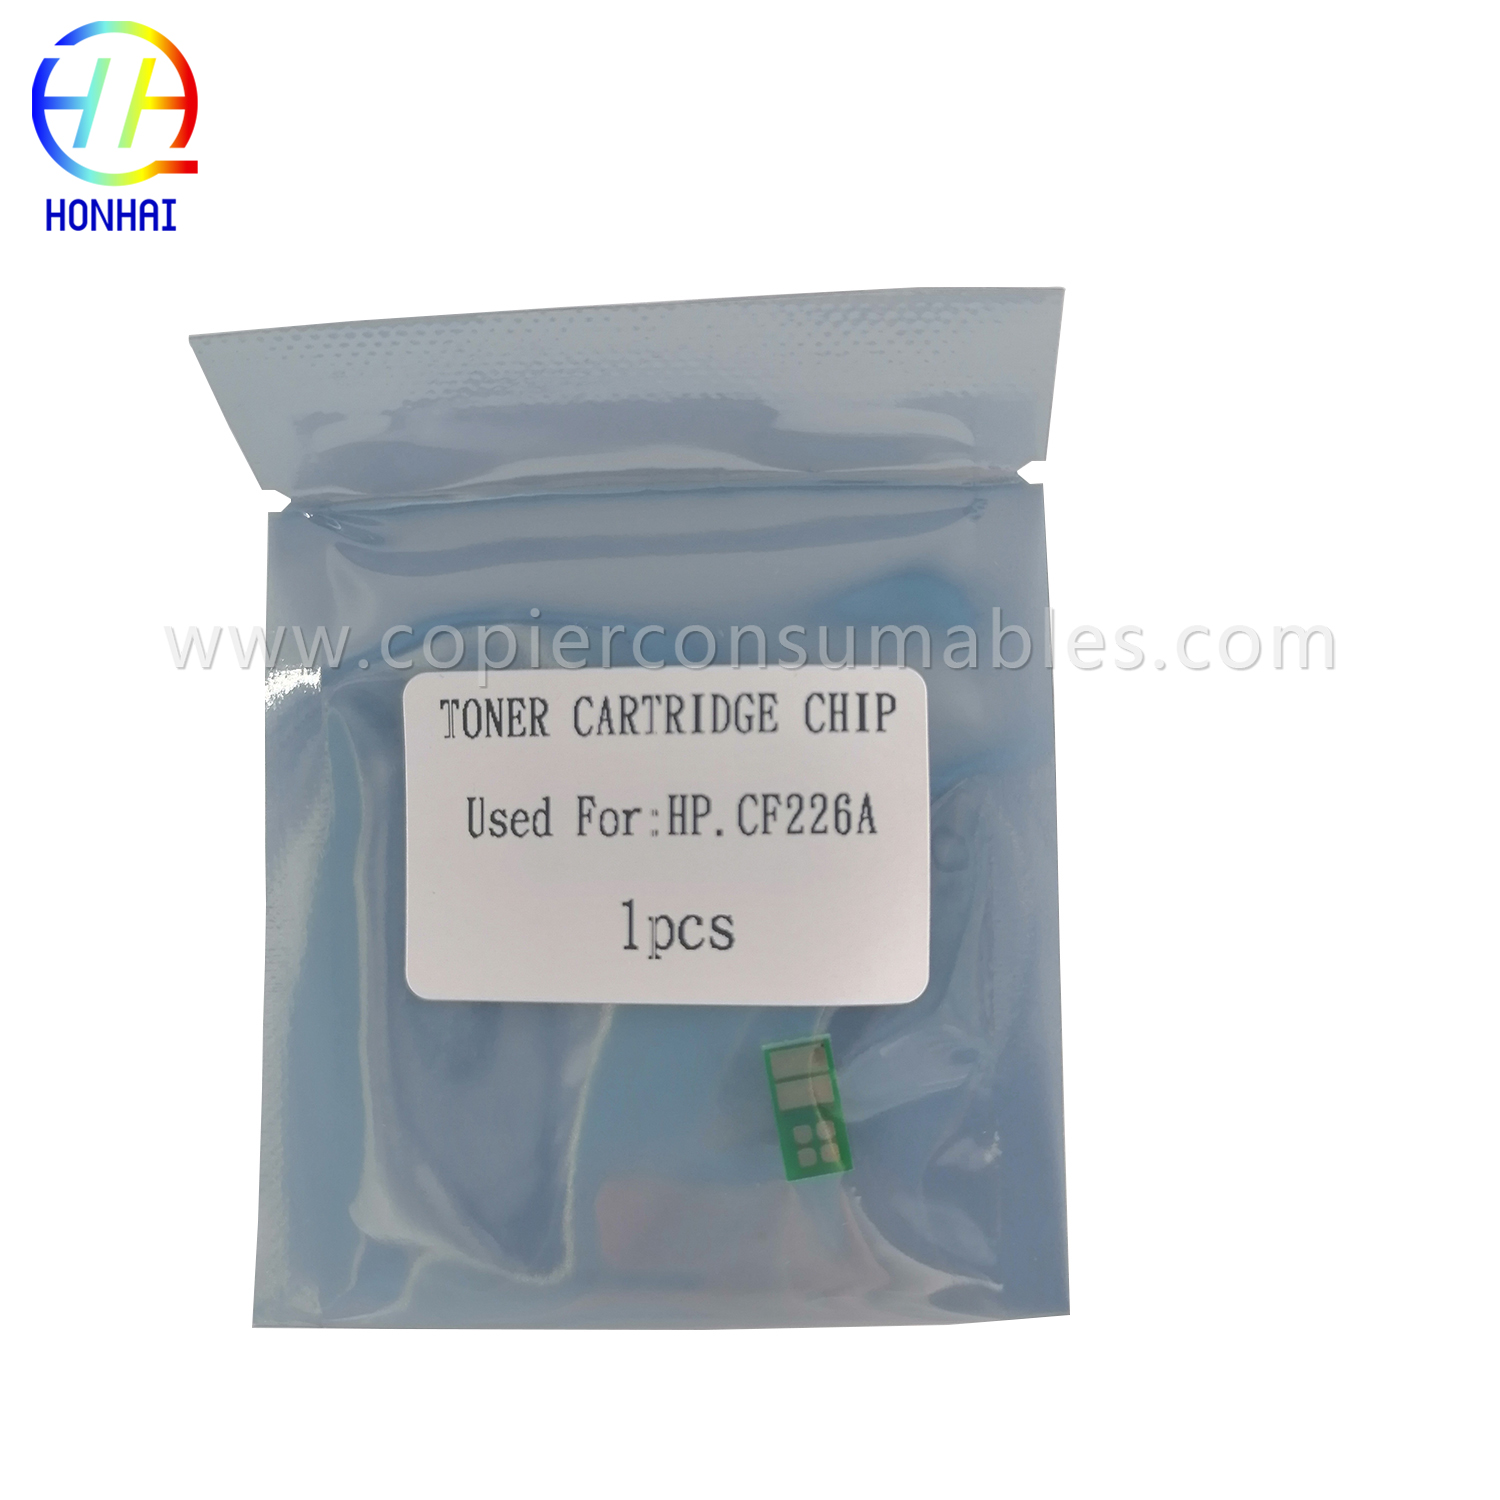 Toner Chip for HP M402 M426 CF226A